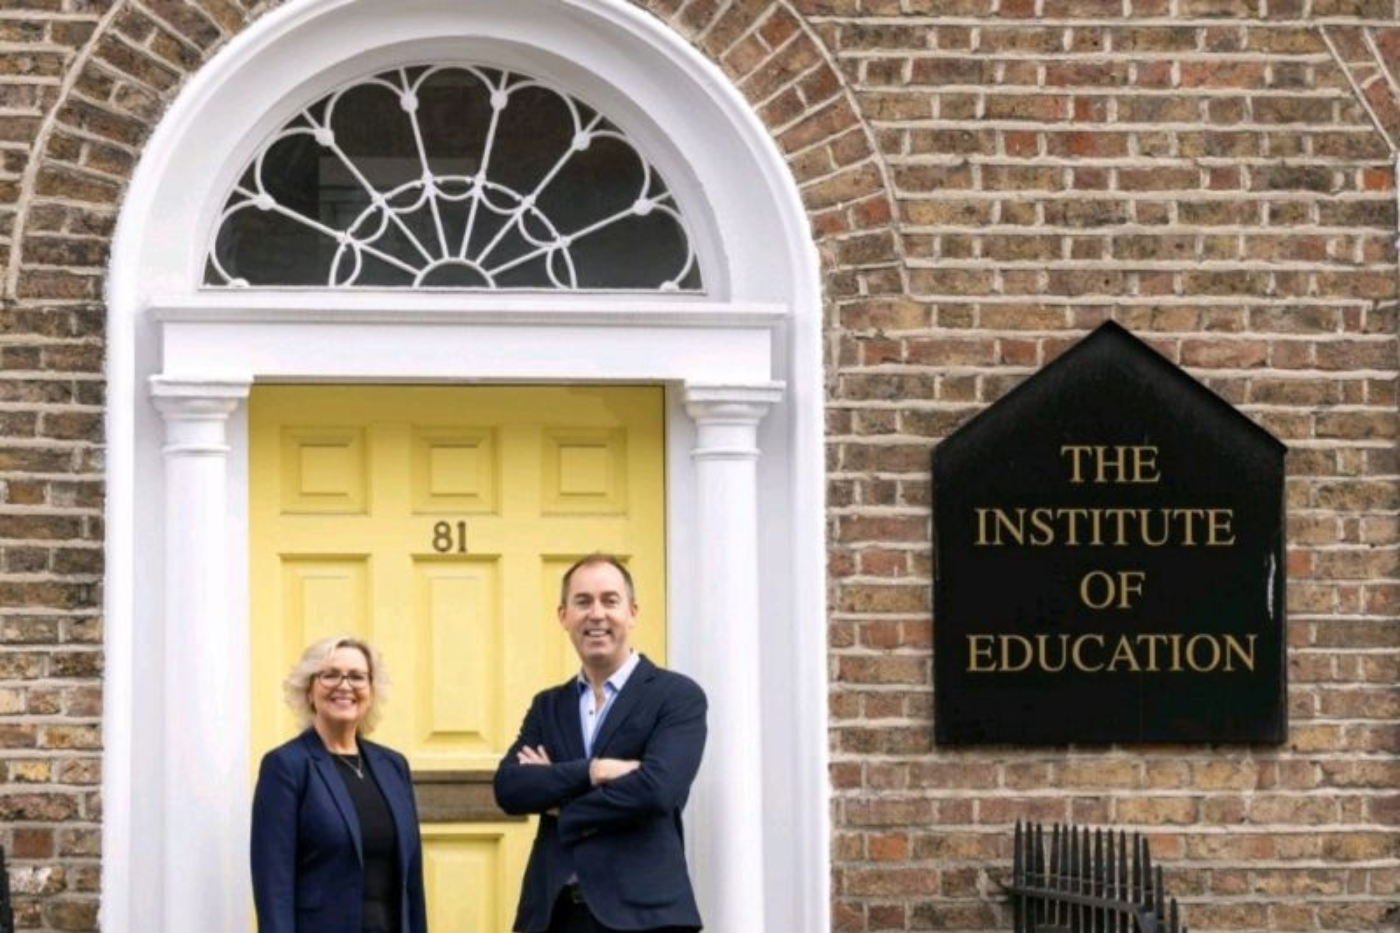 The Institute of Education joins the Dukes Education Family